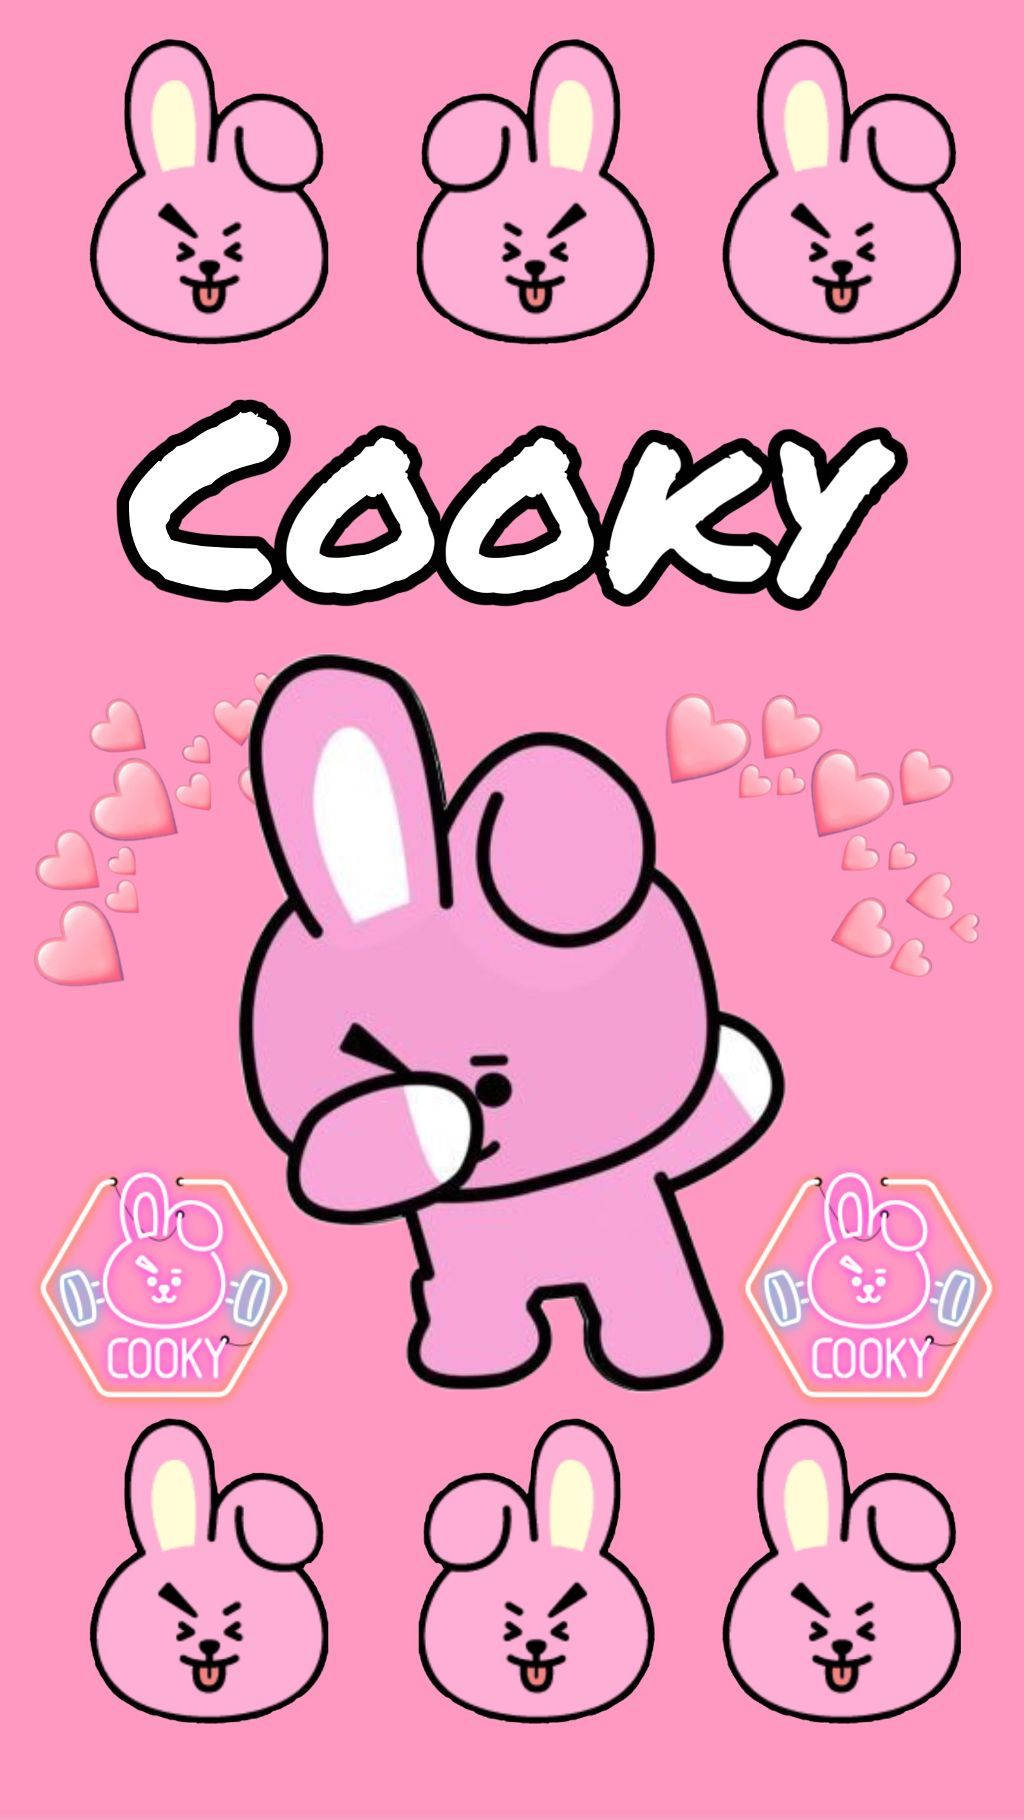 Adorable Cooky Bt21 In A Dab Pose